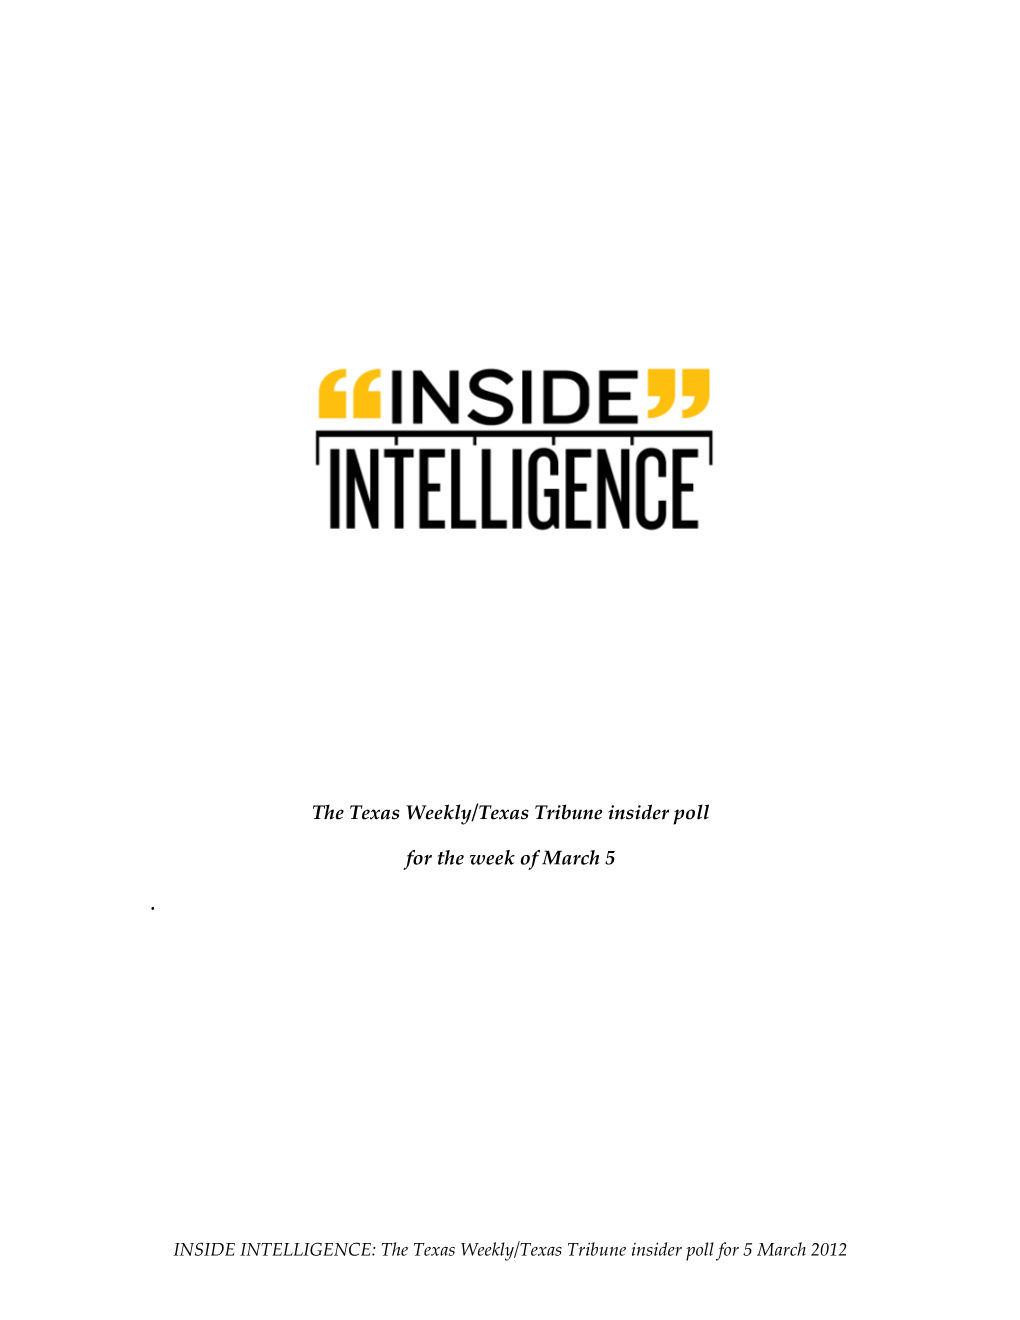 INSIDE INTELLIGENCE: the Texas Weekly/Texas Tribune Insider Poll for 5 March 2012